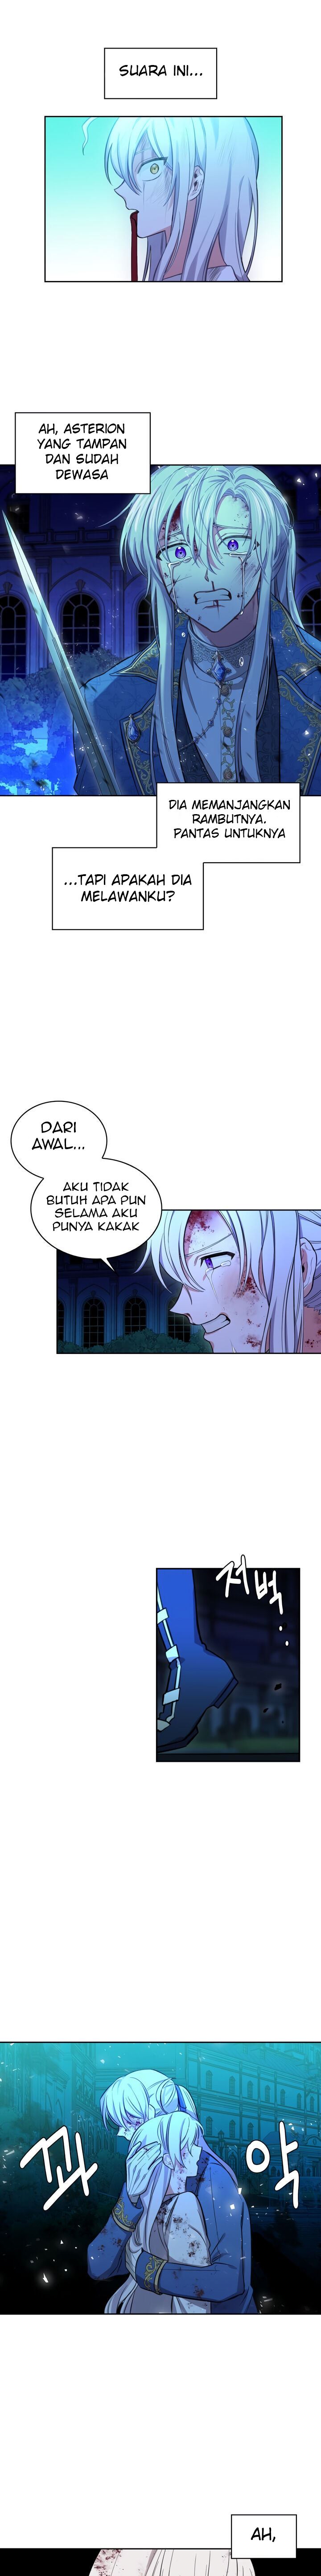 KomiknTouch My Little Brother and You’re Dead Chapter 3